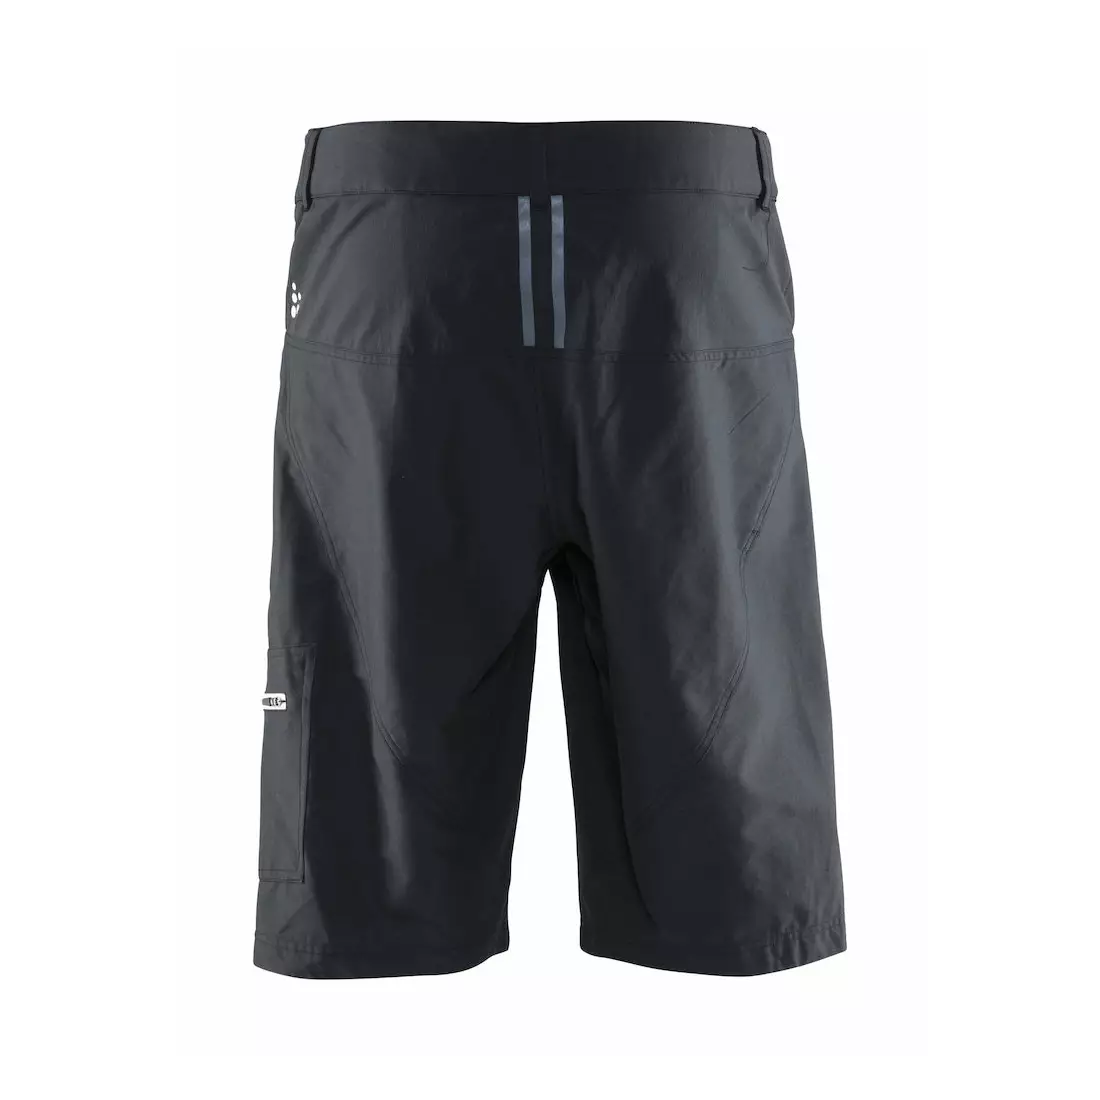 CRAFT Reel 1905006-9900 - men's 2in1 cycling shorts